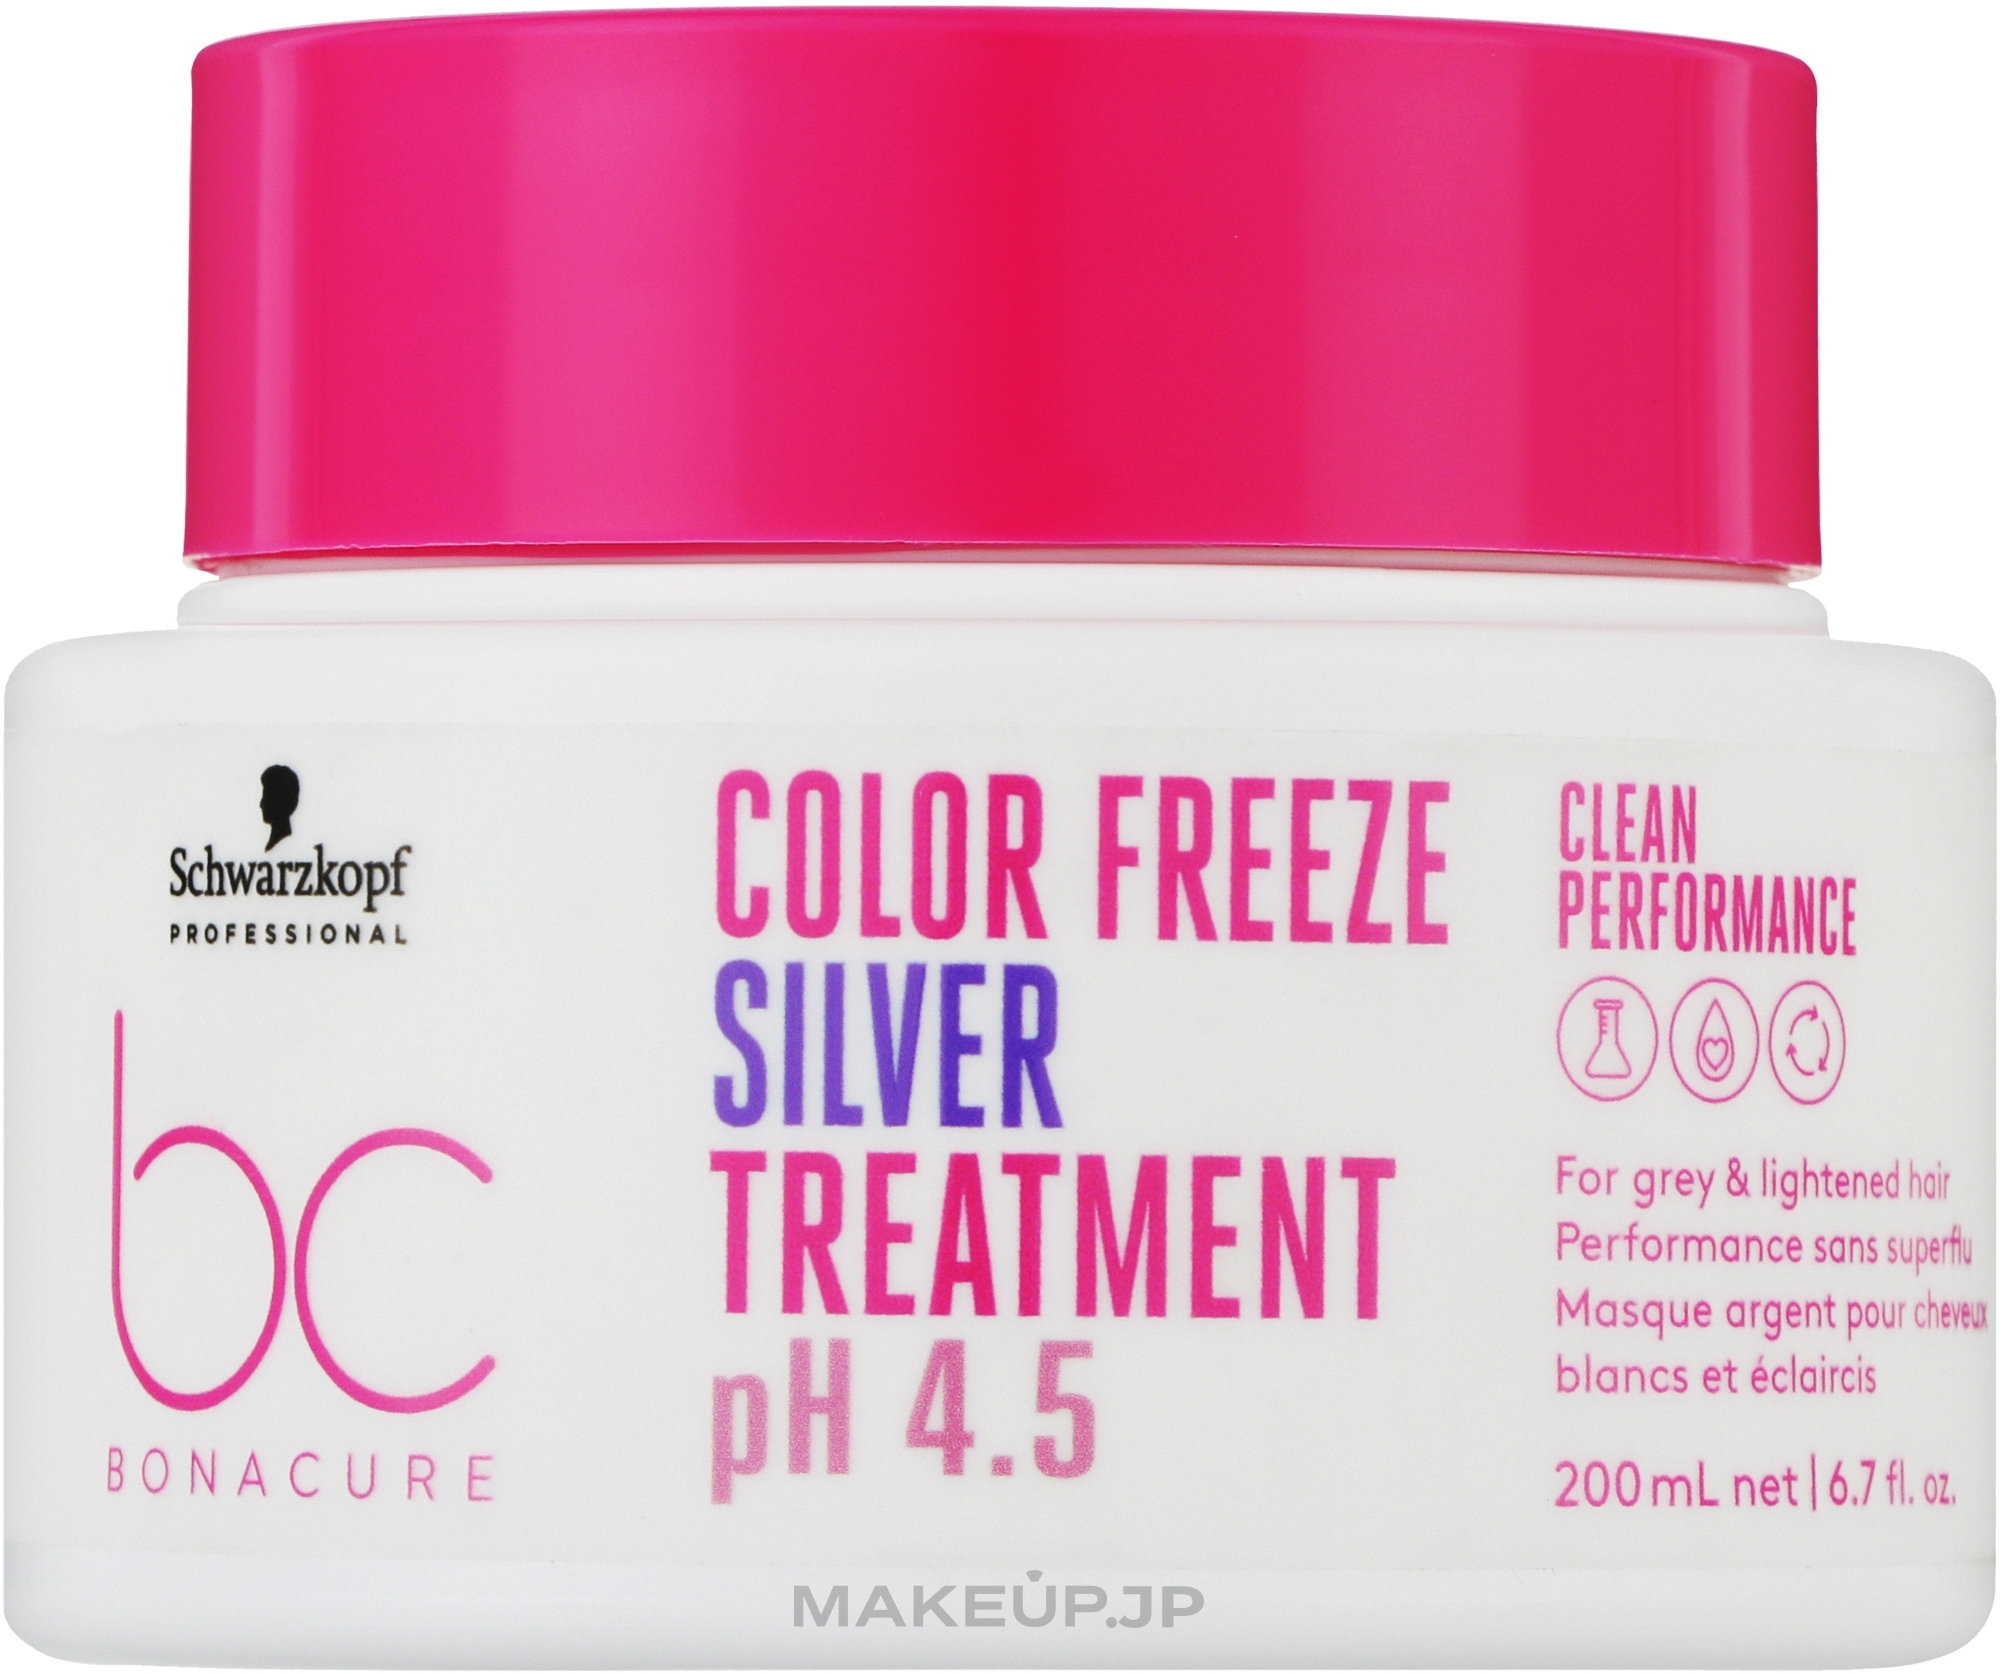 Mask for Grey and Bleached Hair - Schwarzkopf Professional Bonacure Color Freeze Silver Treatment pH 4.5 — photo 200 ml